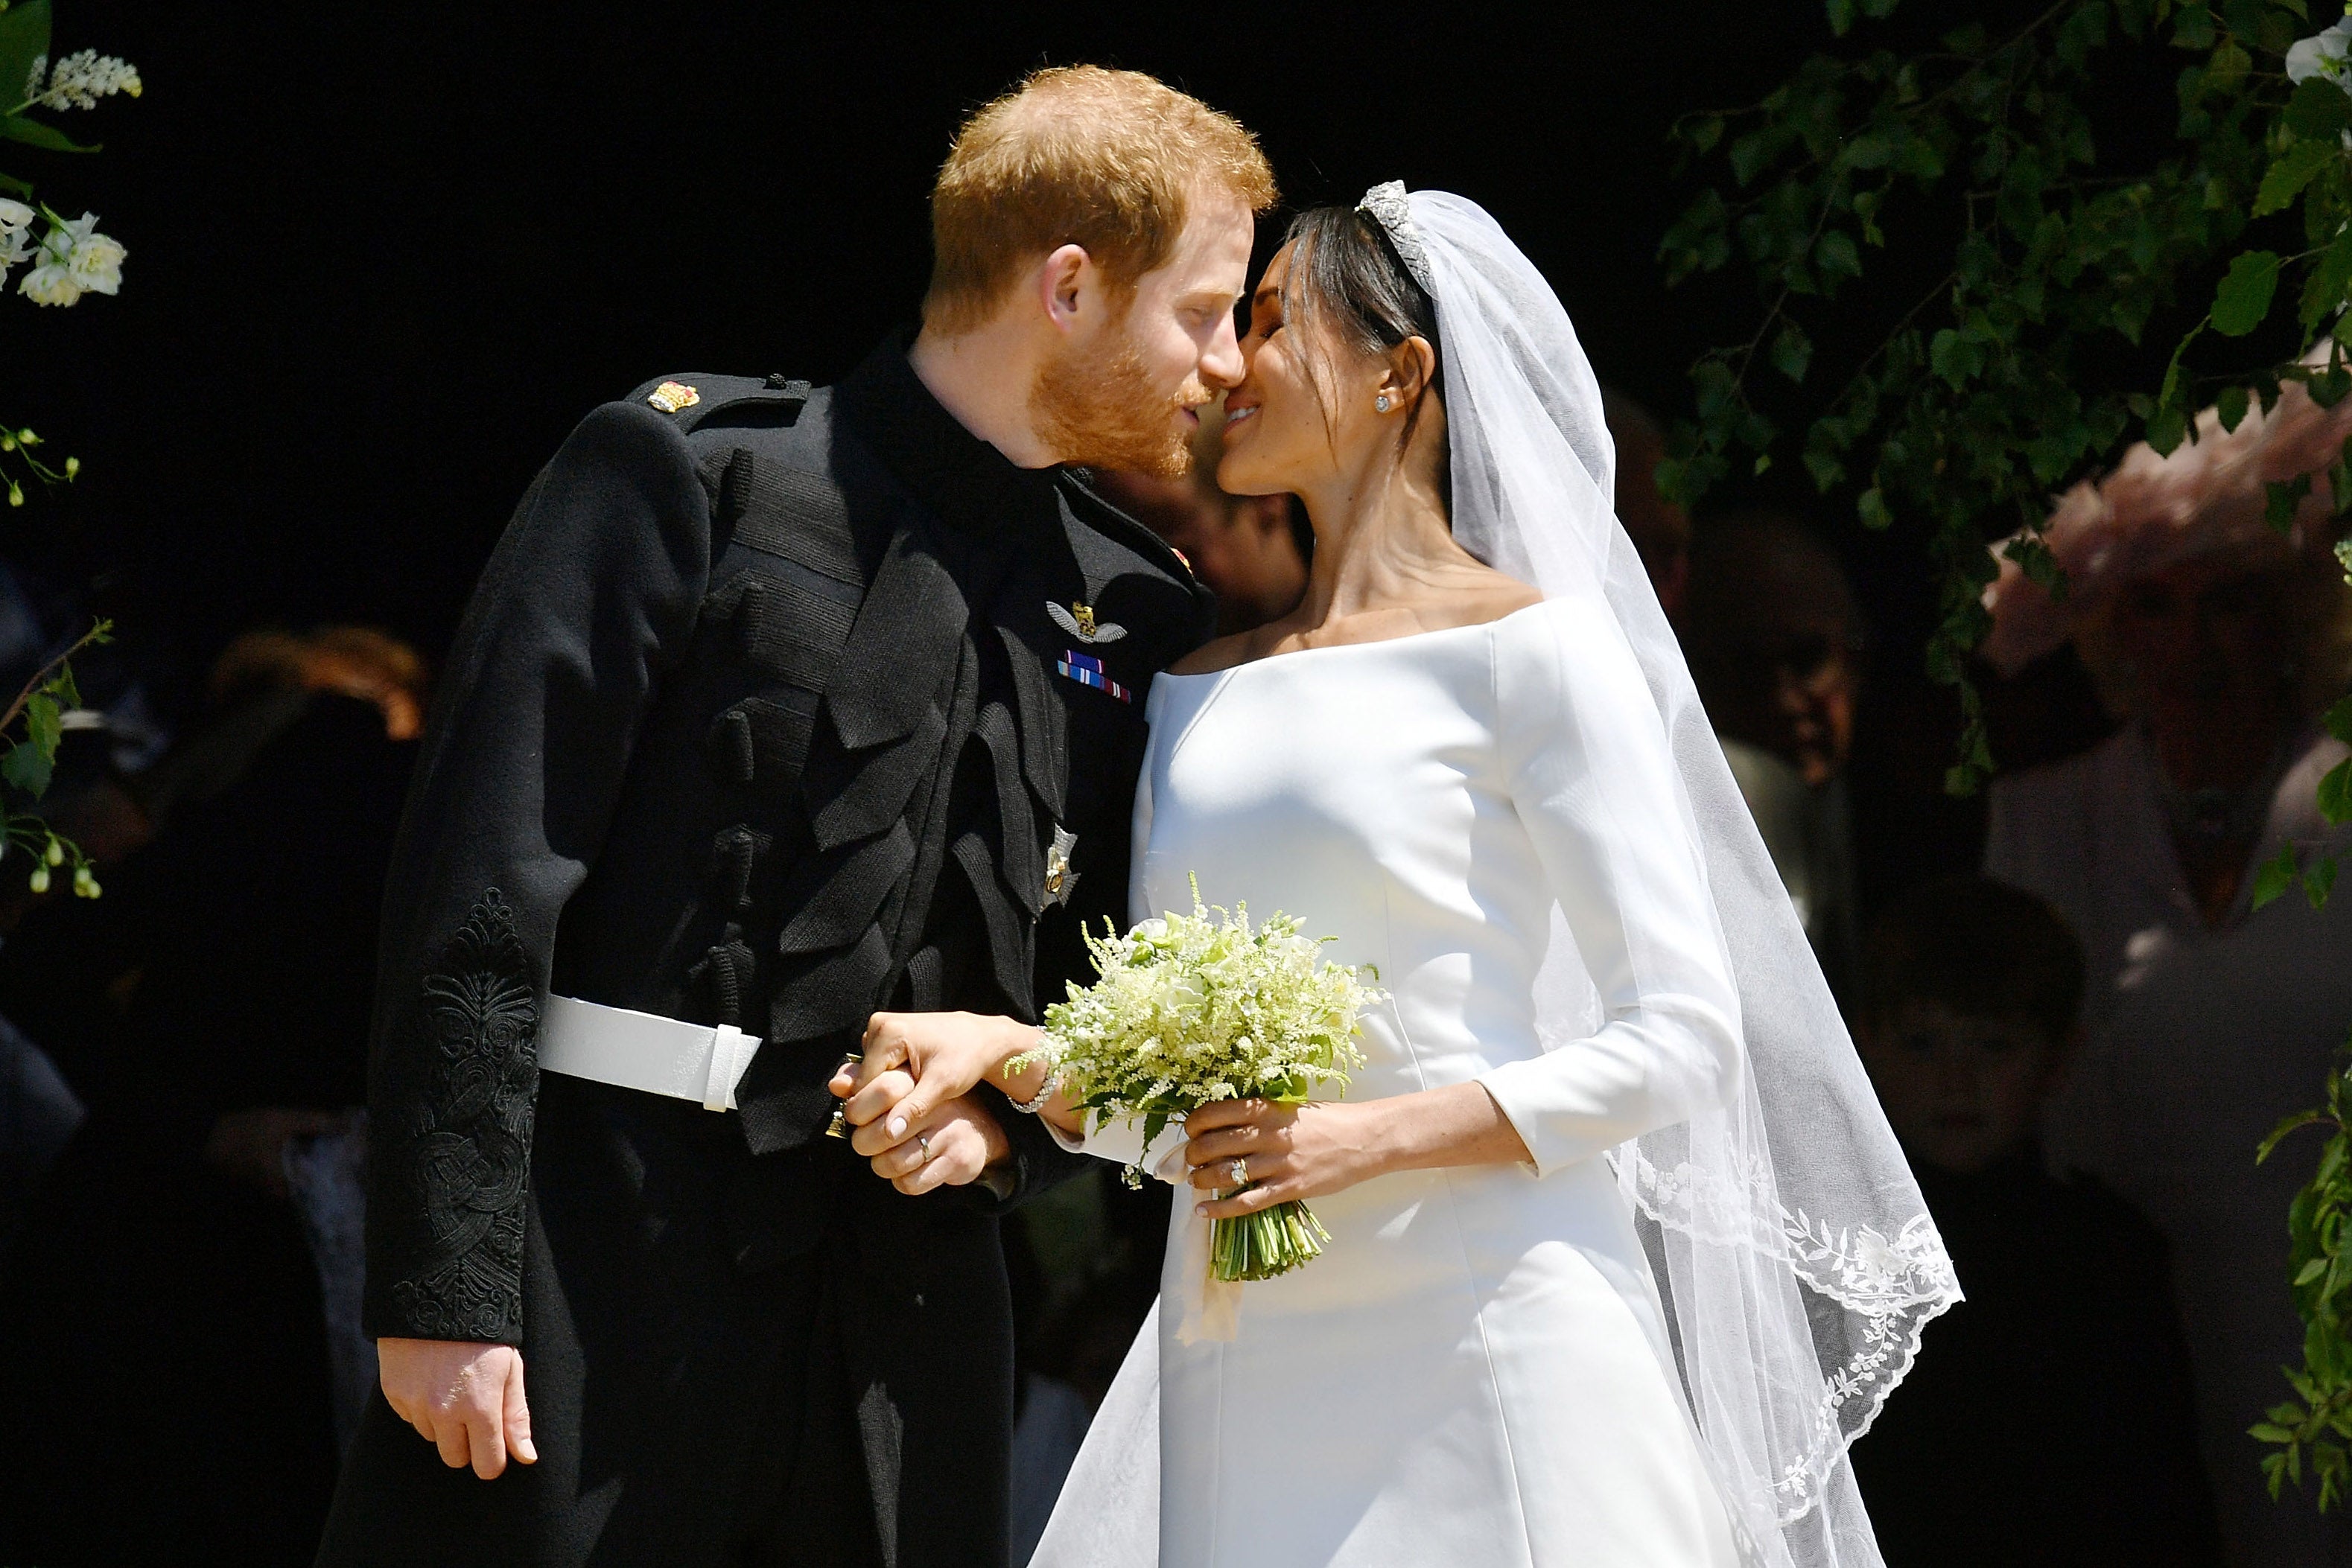 Every Little Detail We Loved About Meghan Markle and Prince Harry's History-Making Royal Wedding
